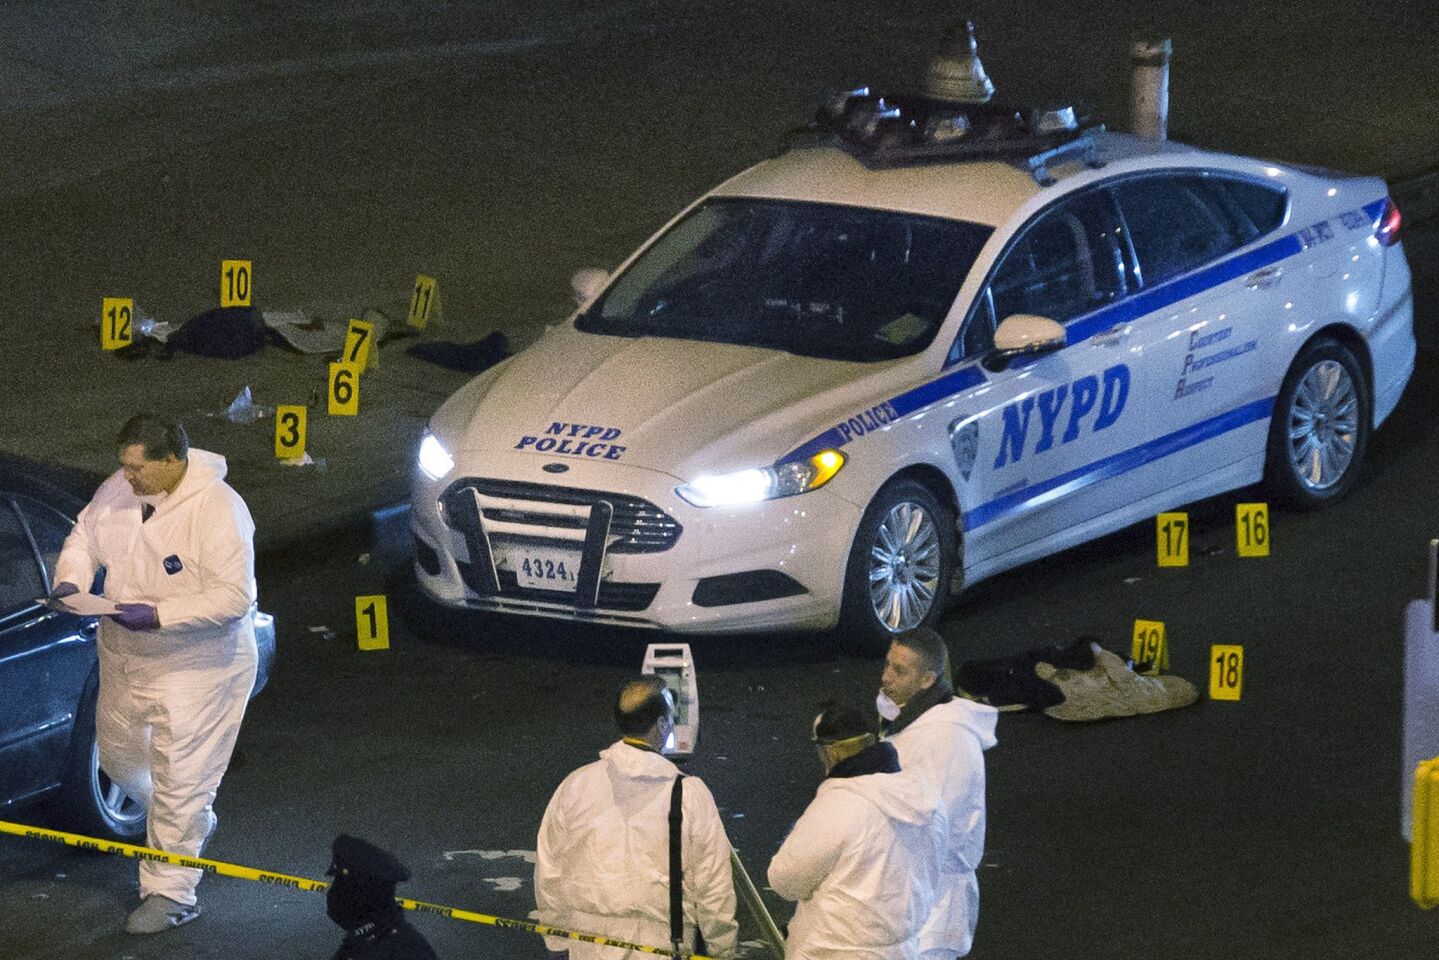 Bulletproof vests lie beside an NYPD patrol car as investigators work at the scene of two officers' fatal shootings. Authorities say the gunman acted so quickly that neither officer had time to draw his weapon.